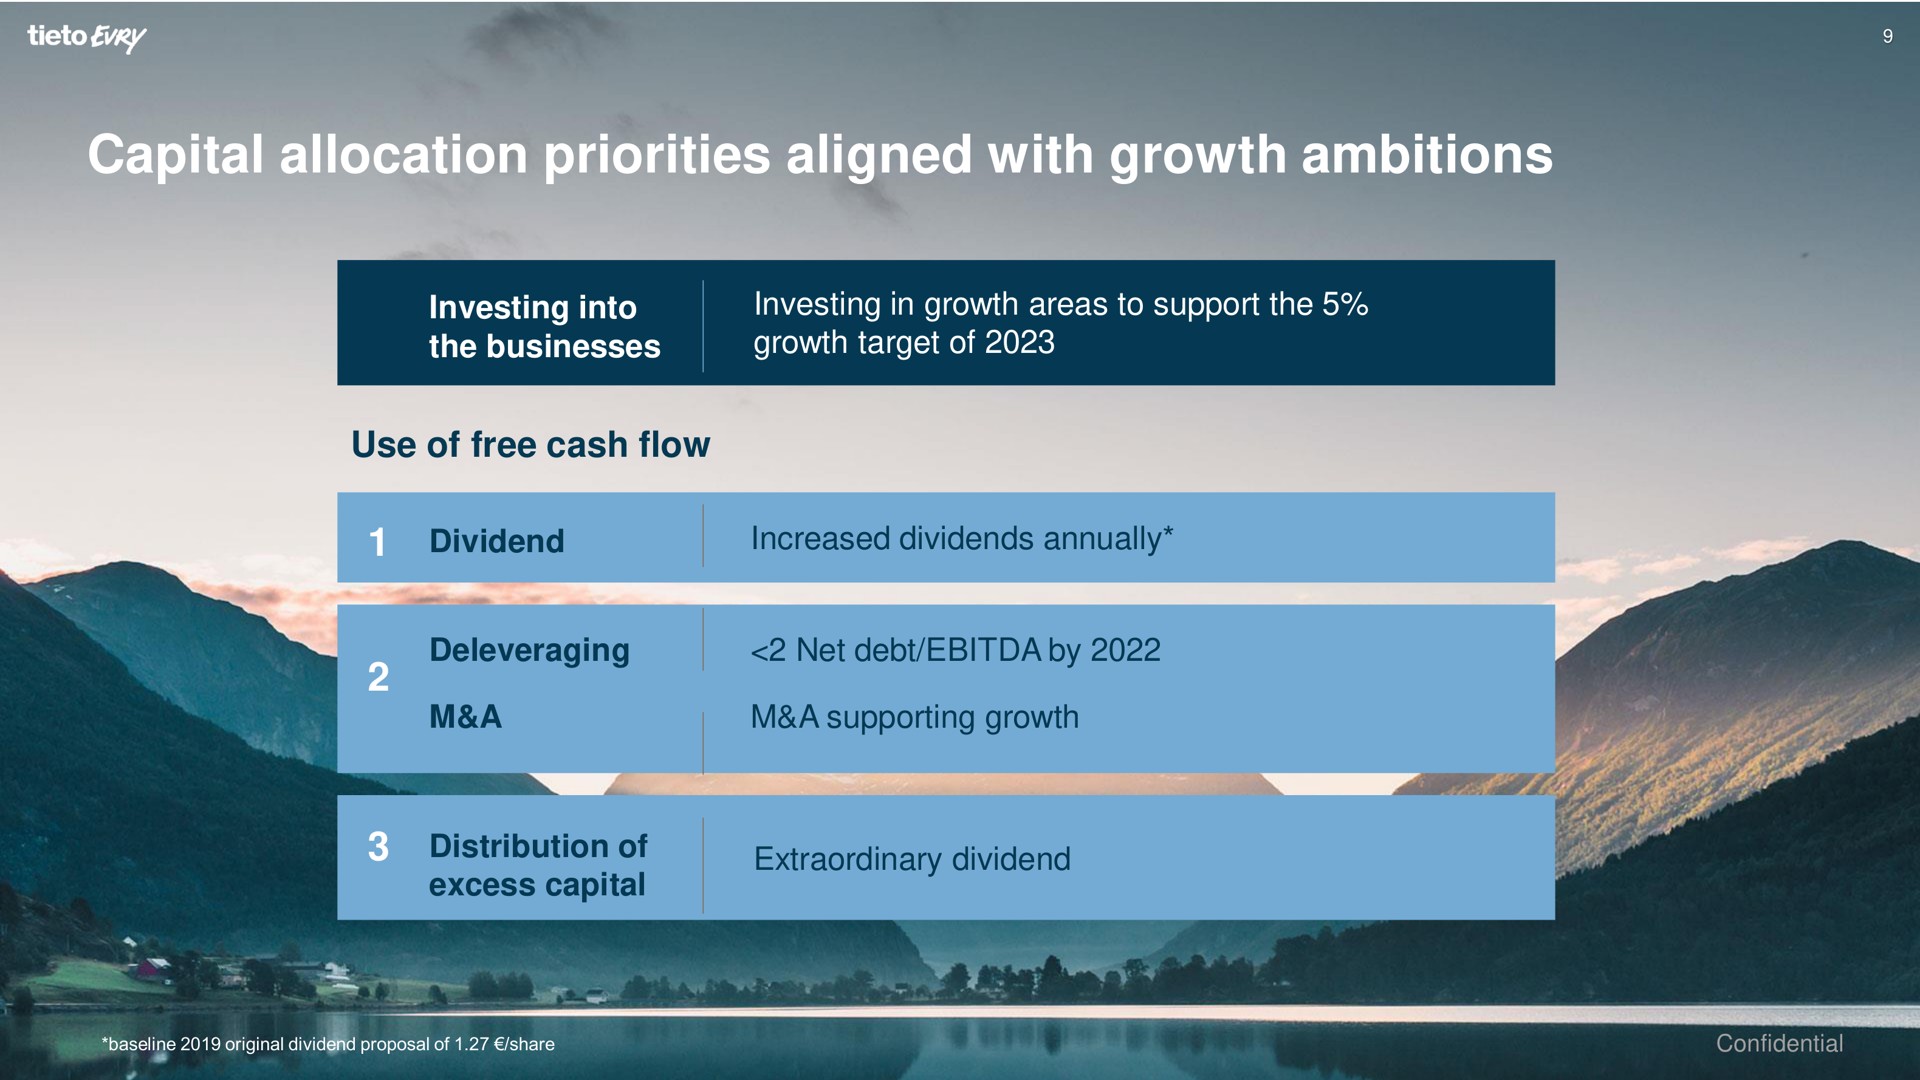 capital allocation priorities aligned with growth ambitions | Tietoevry